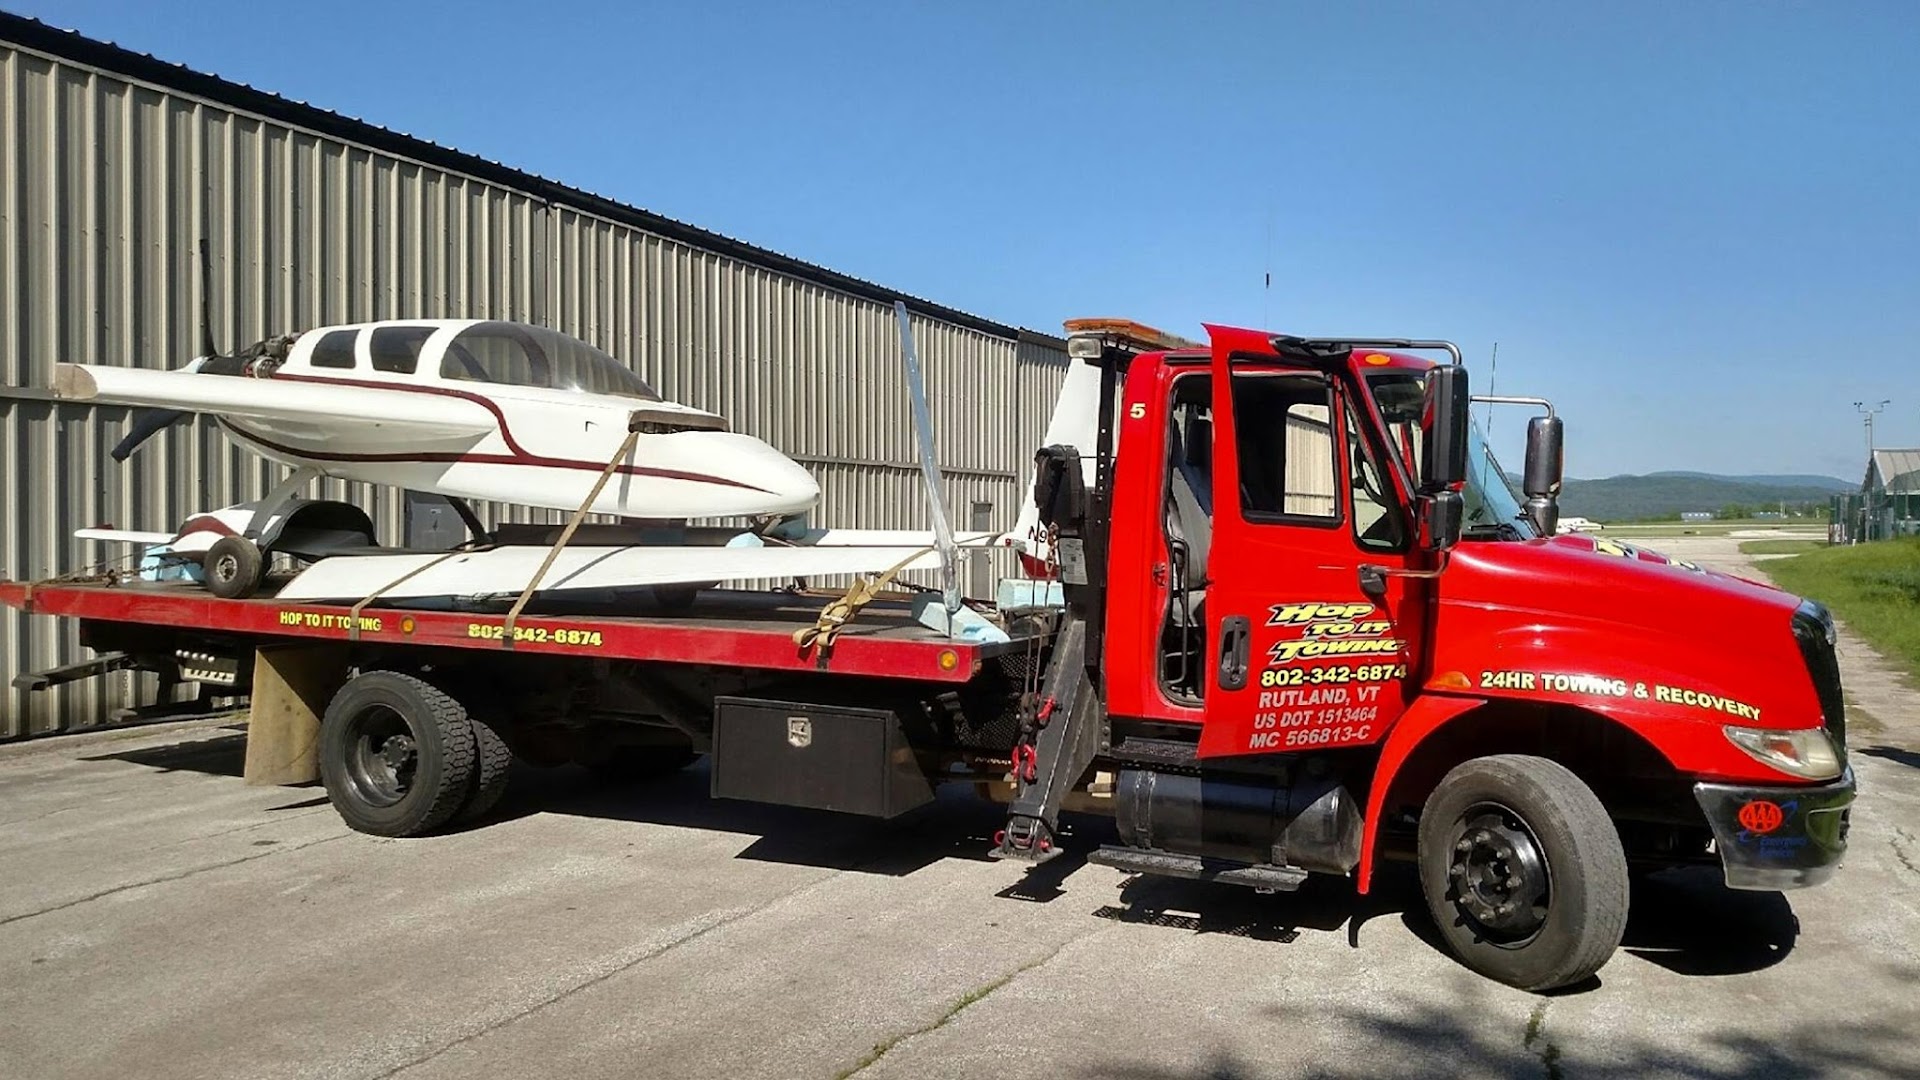 Towing service In Rutland VT 